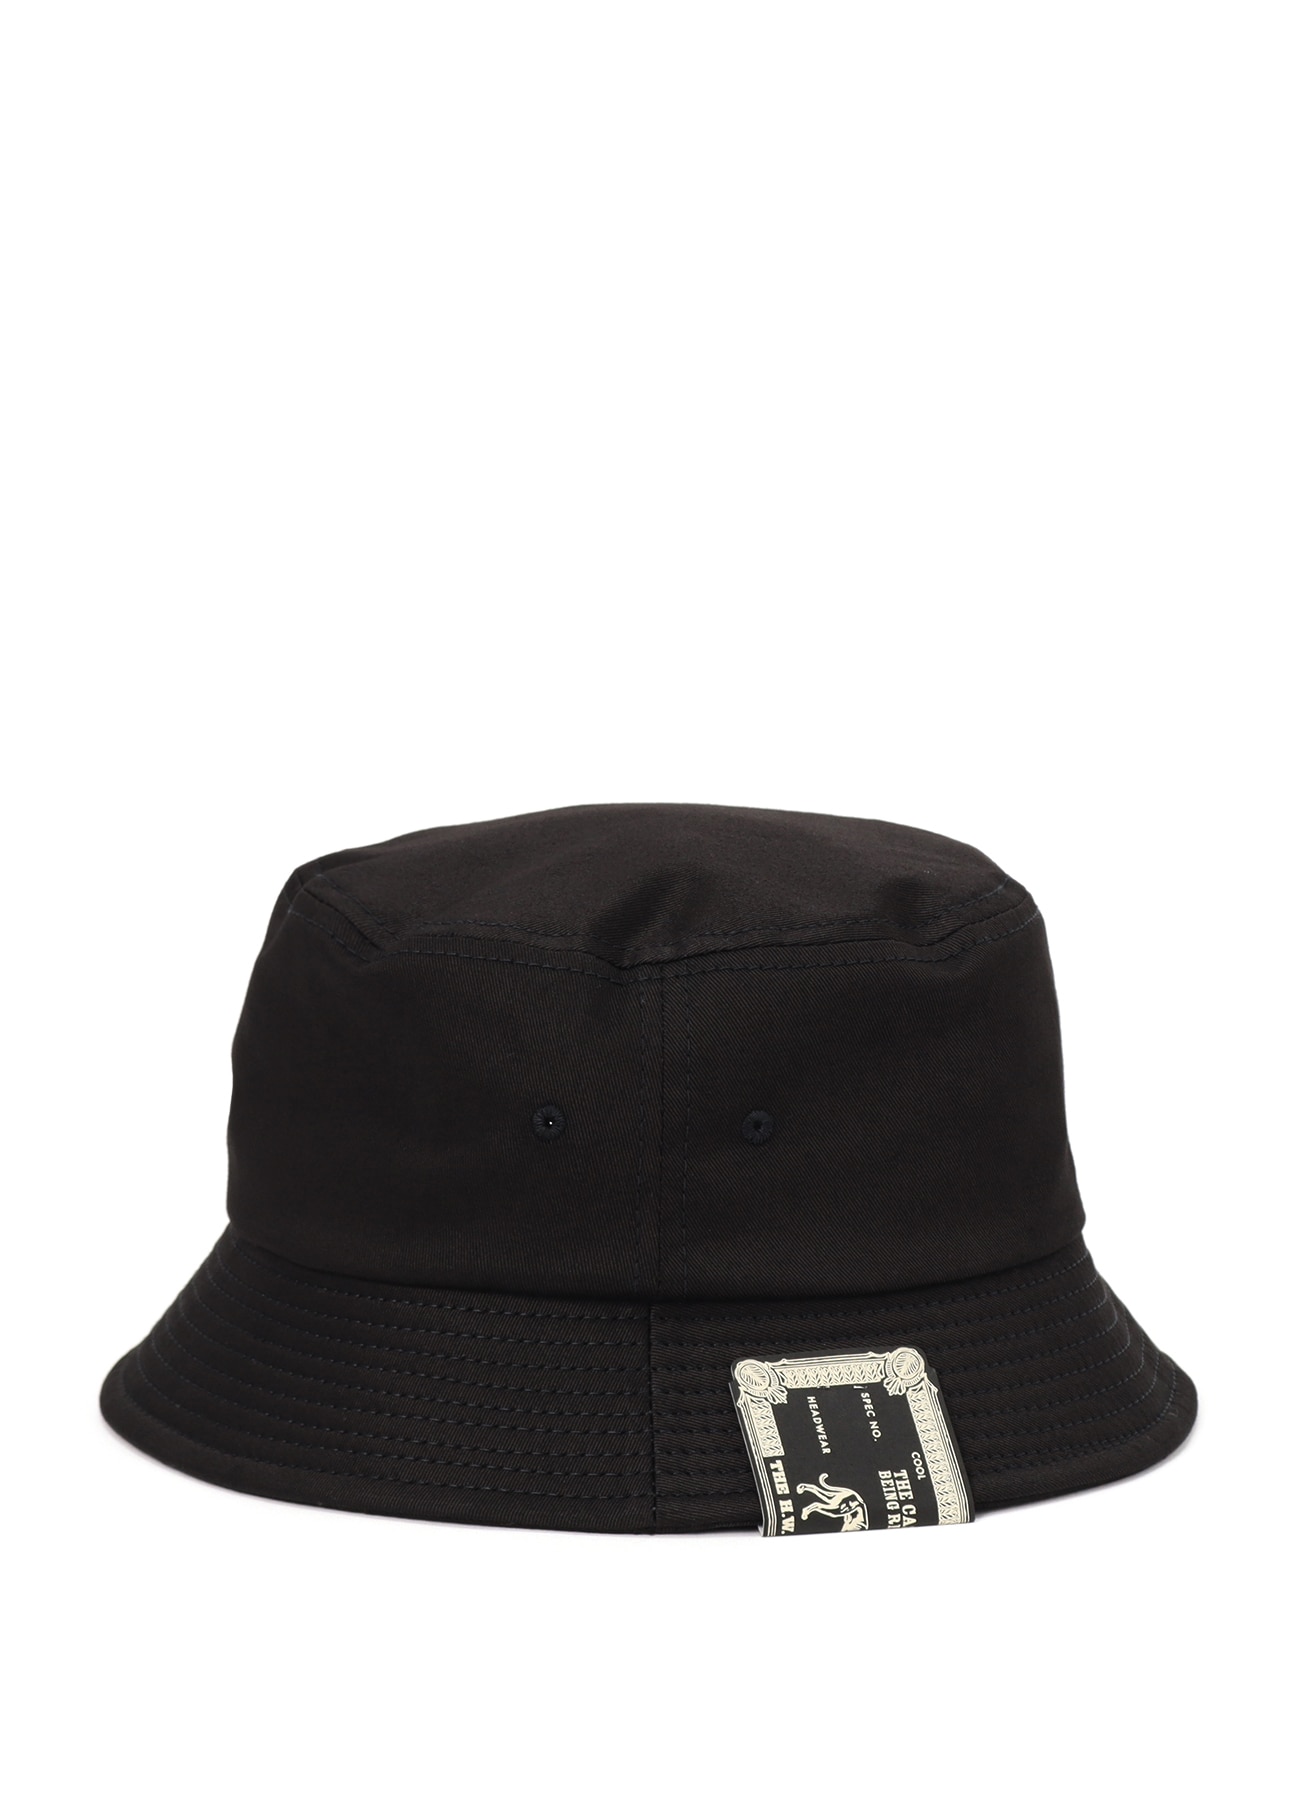 WILDSIDE × THE.H.W.DOG&CO. TRUCKER HAT(M BLACK): THE H.W. DOG & CO